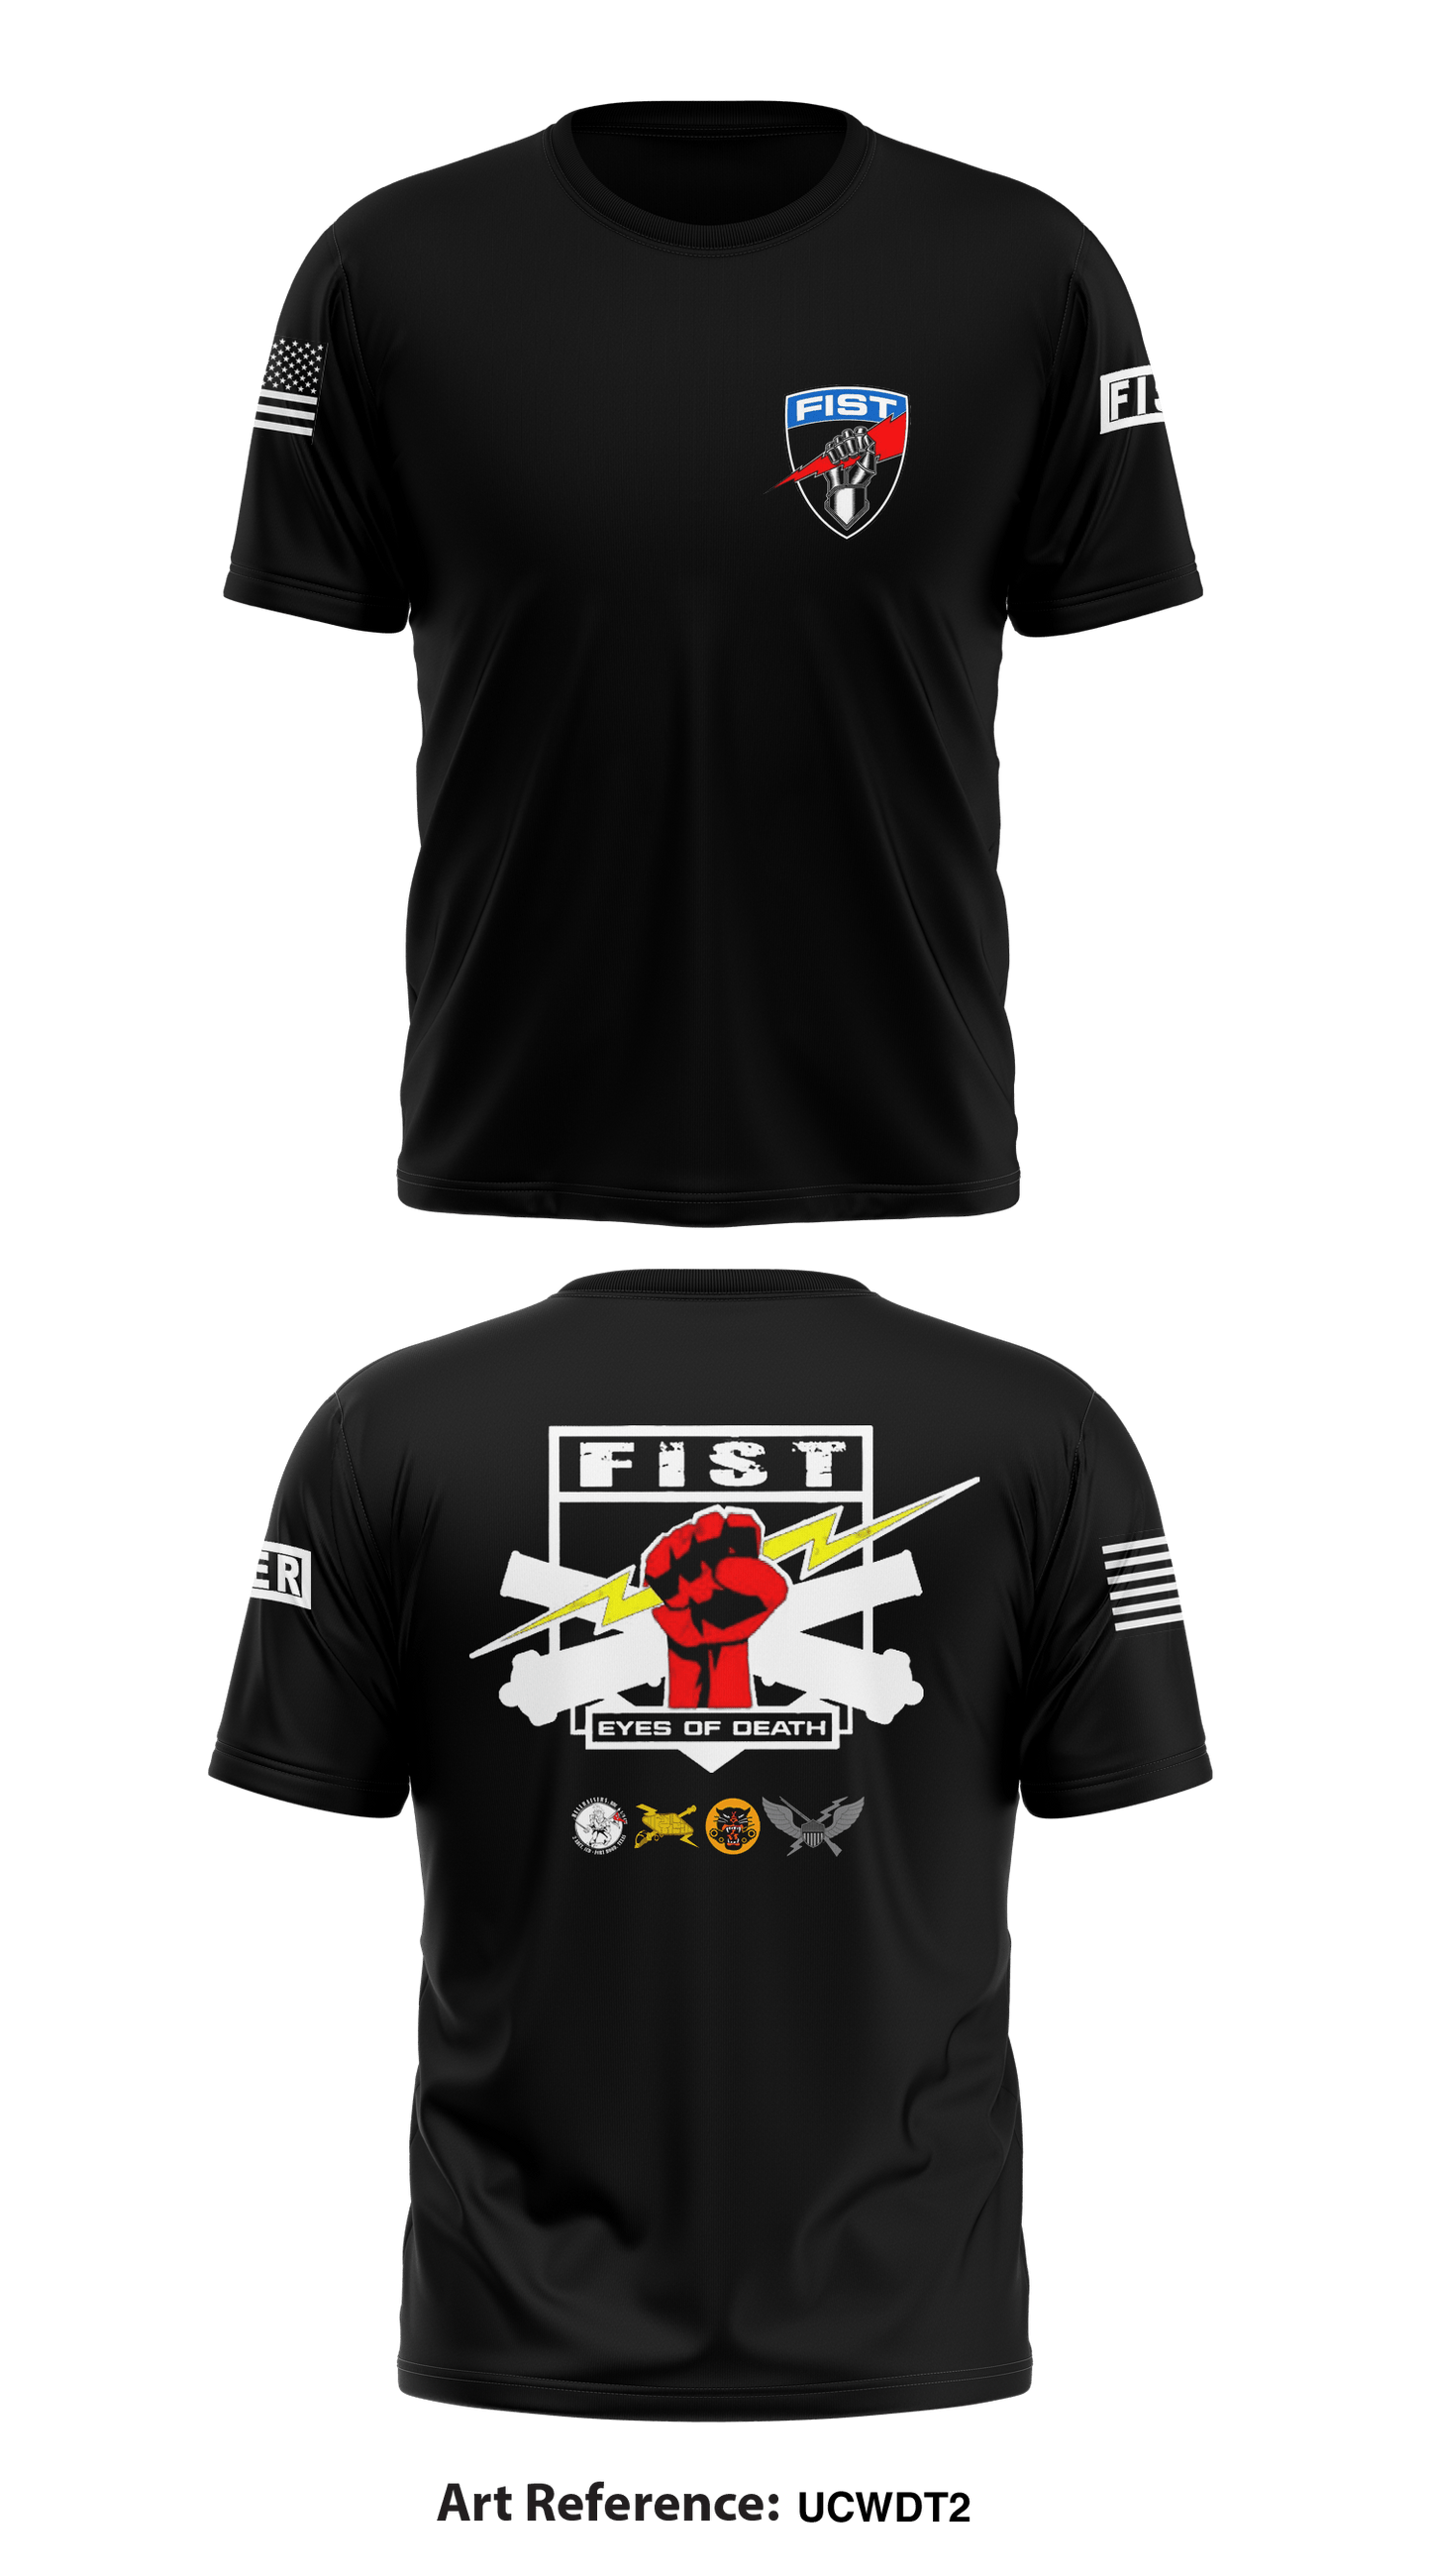 1-8 FIST Store 1 Core Men's SS Performance Tee - uCWDt2